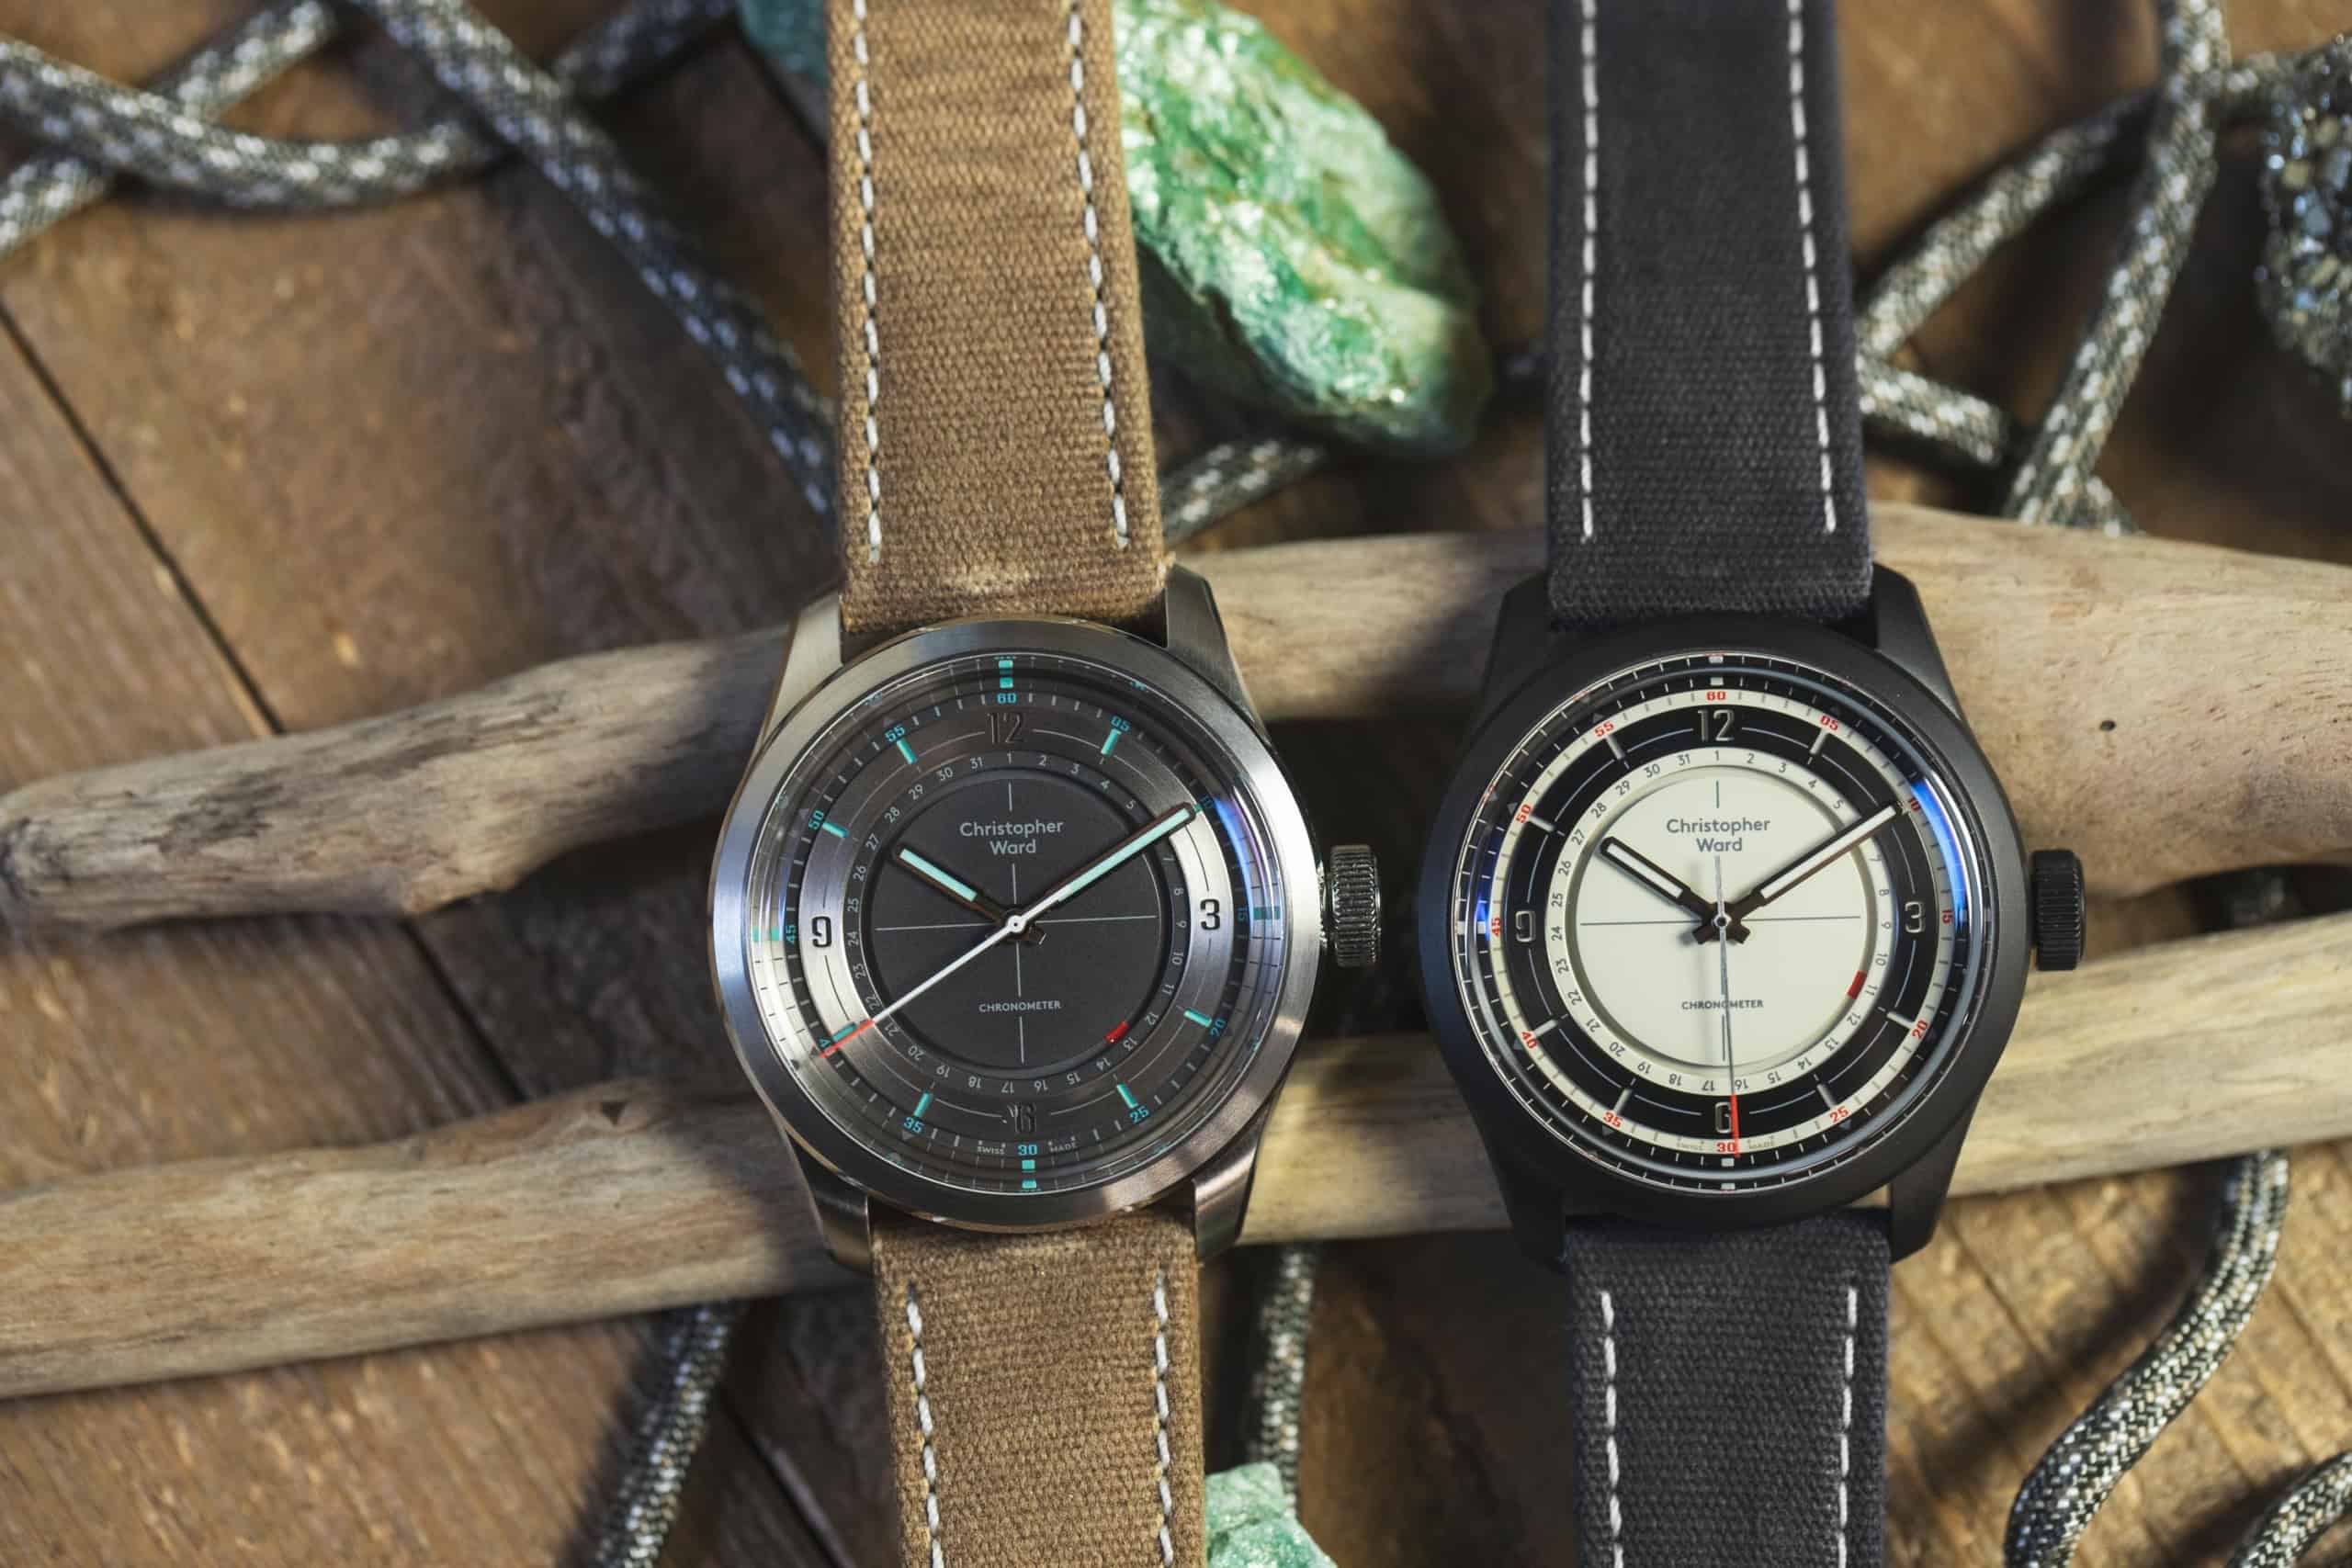 Introducing the Christopher Ward x Worn & Wound C65 Sandstorm and Sandstorm Blackout Chronometers